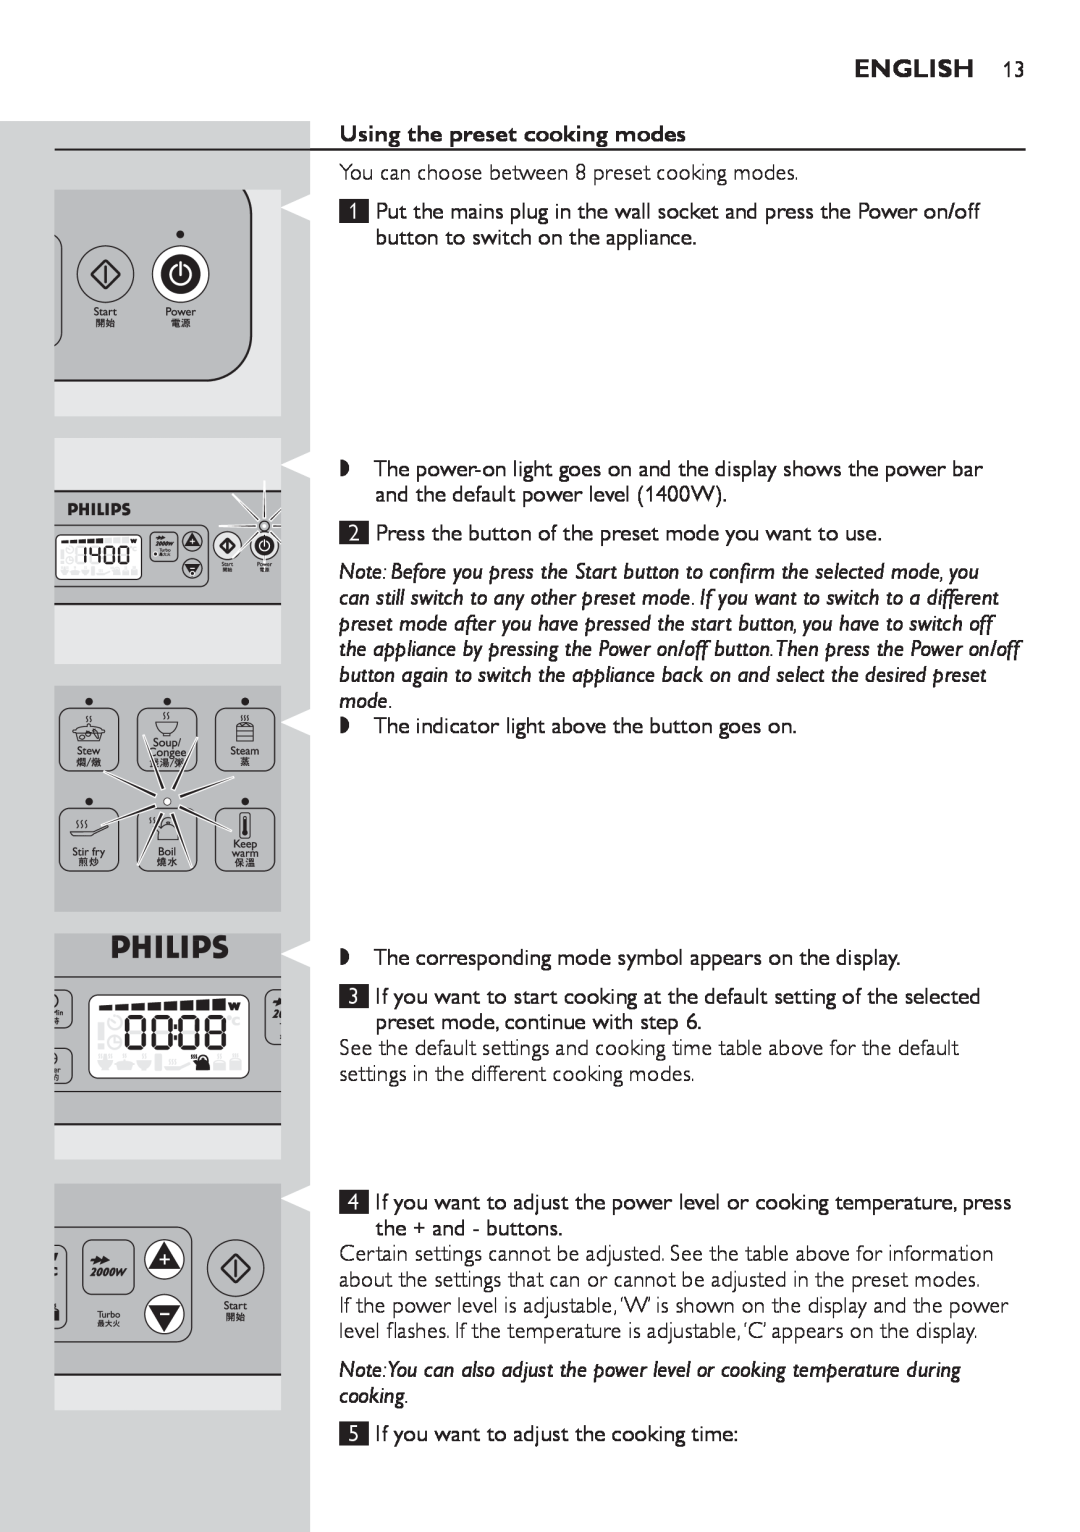 Philips HD4918 manual English, Using the preset cooking modes 